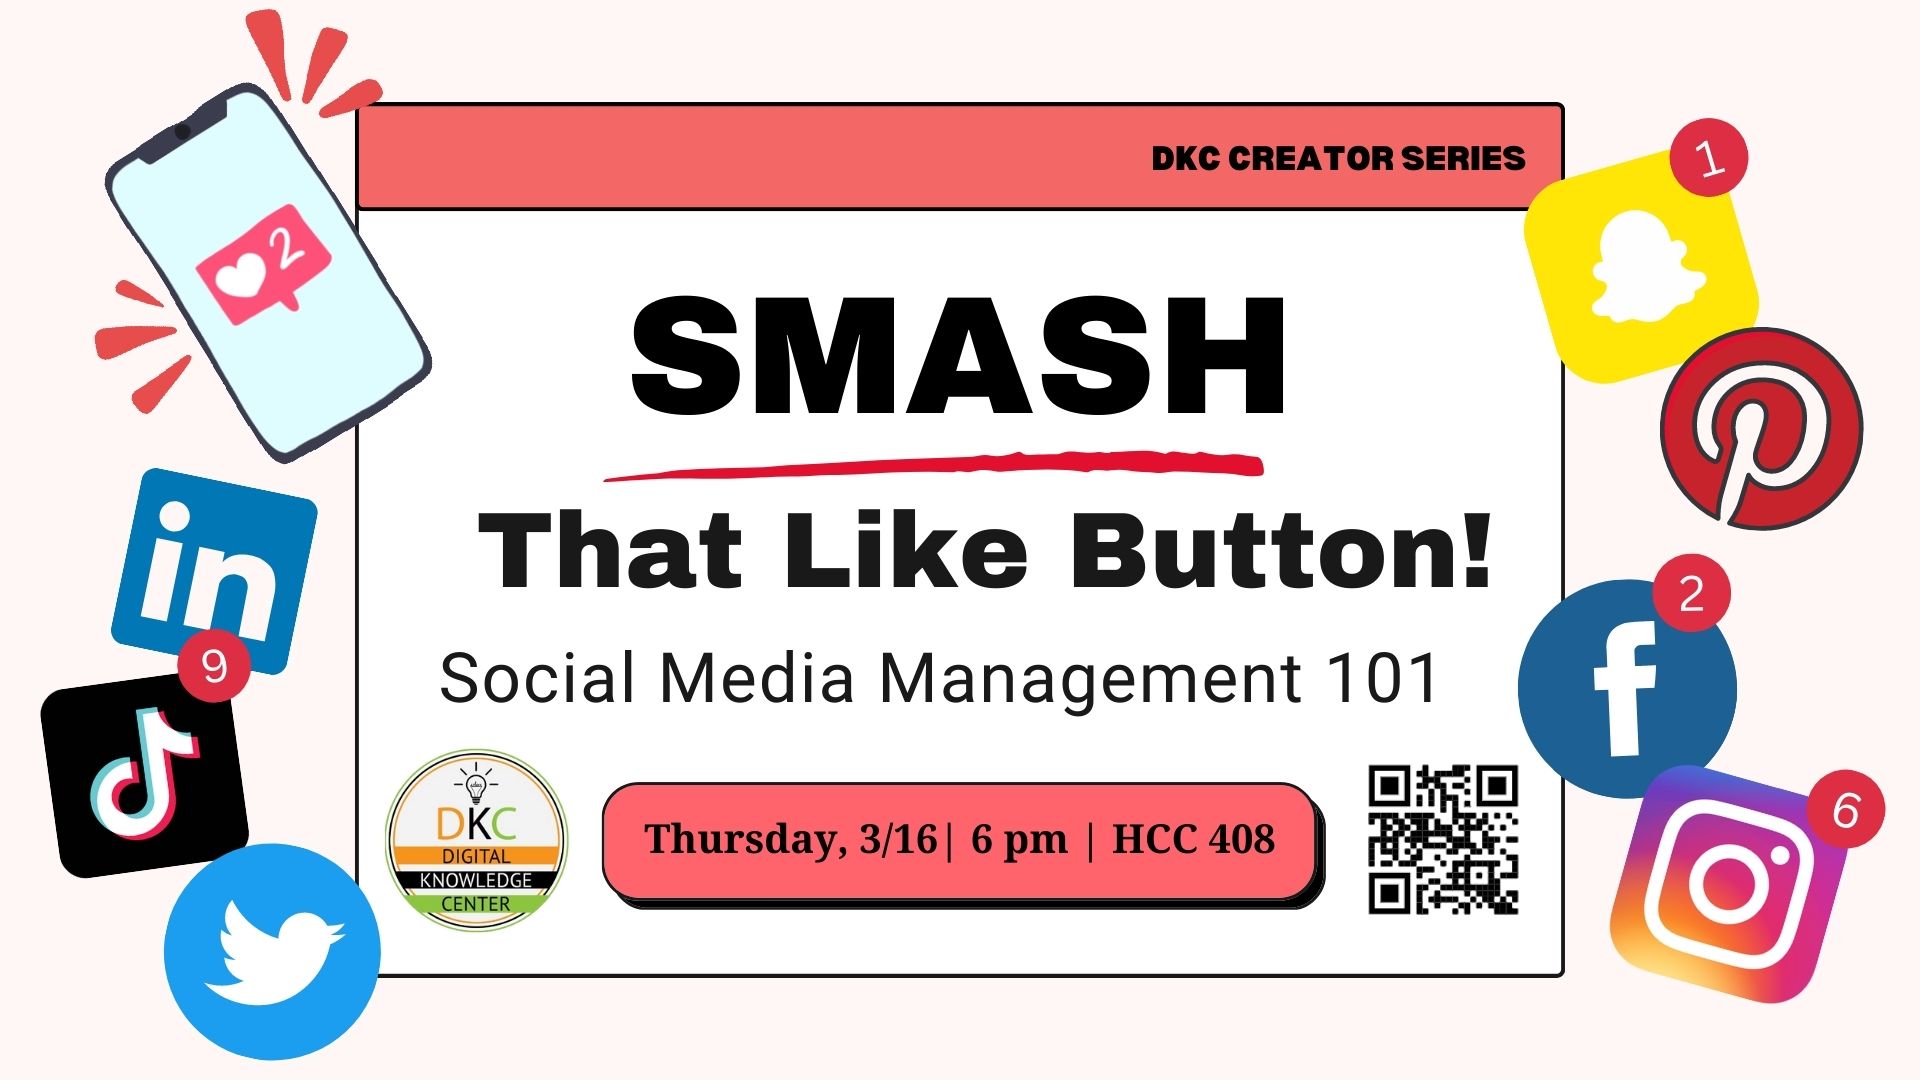 "Smash That Like Button: Social Media Management 101" workshop on Thursday, March 16 from 6 to 7pm in HCC 408.